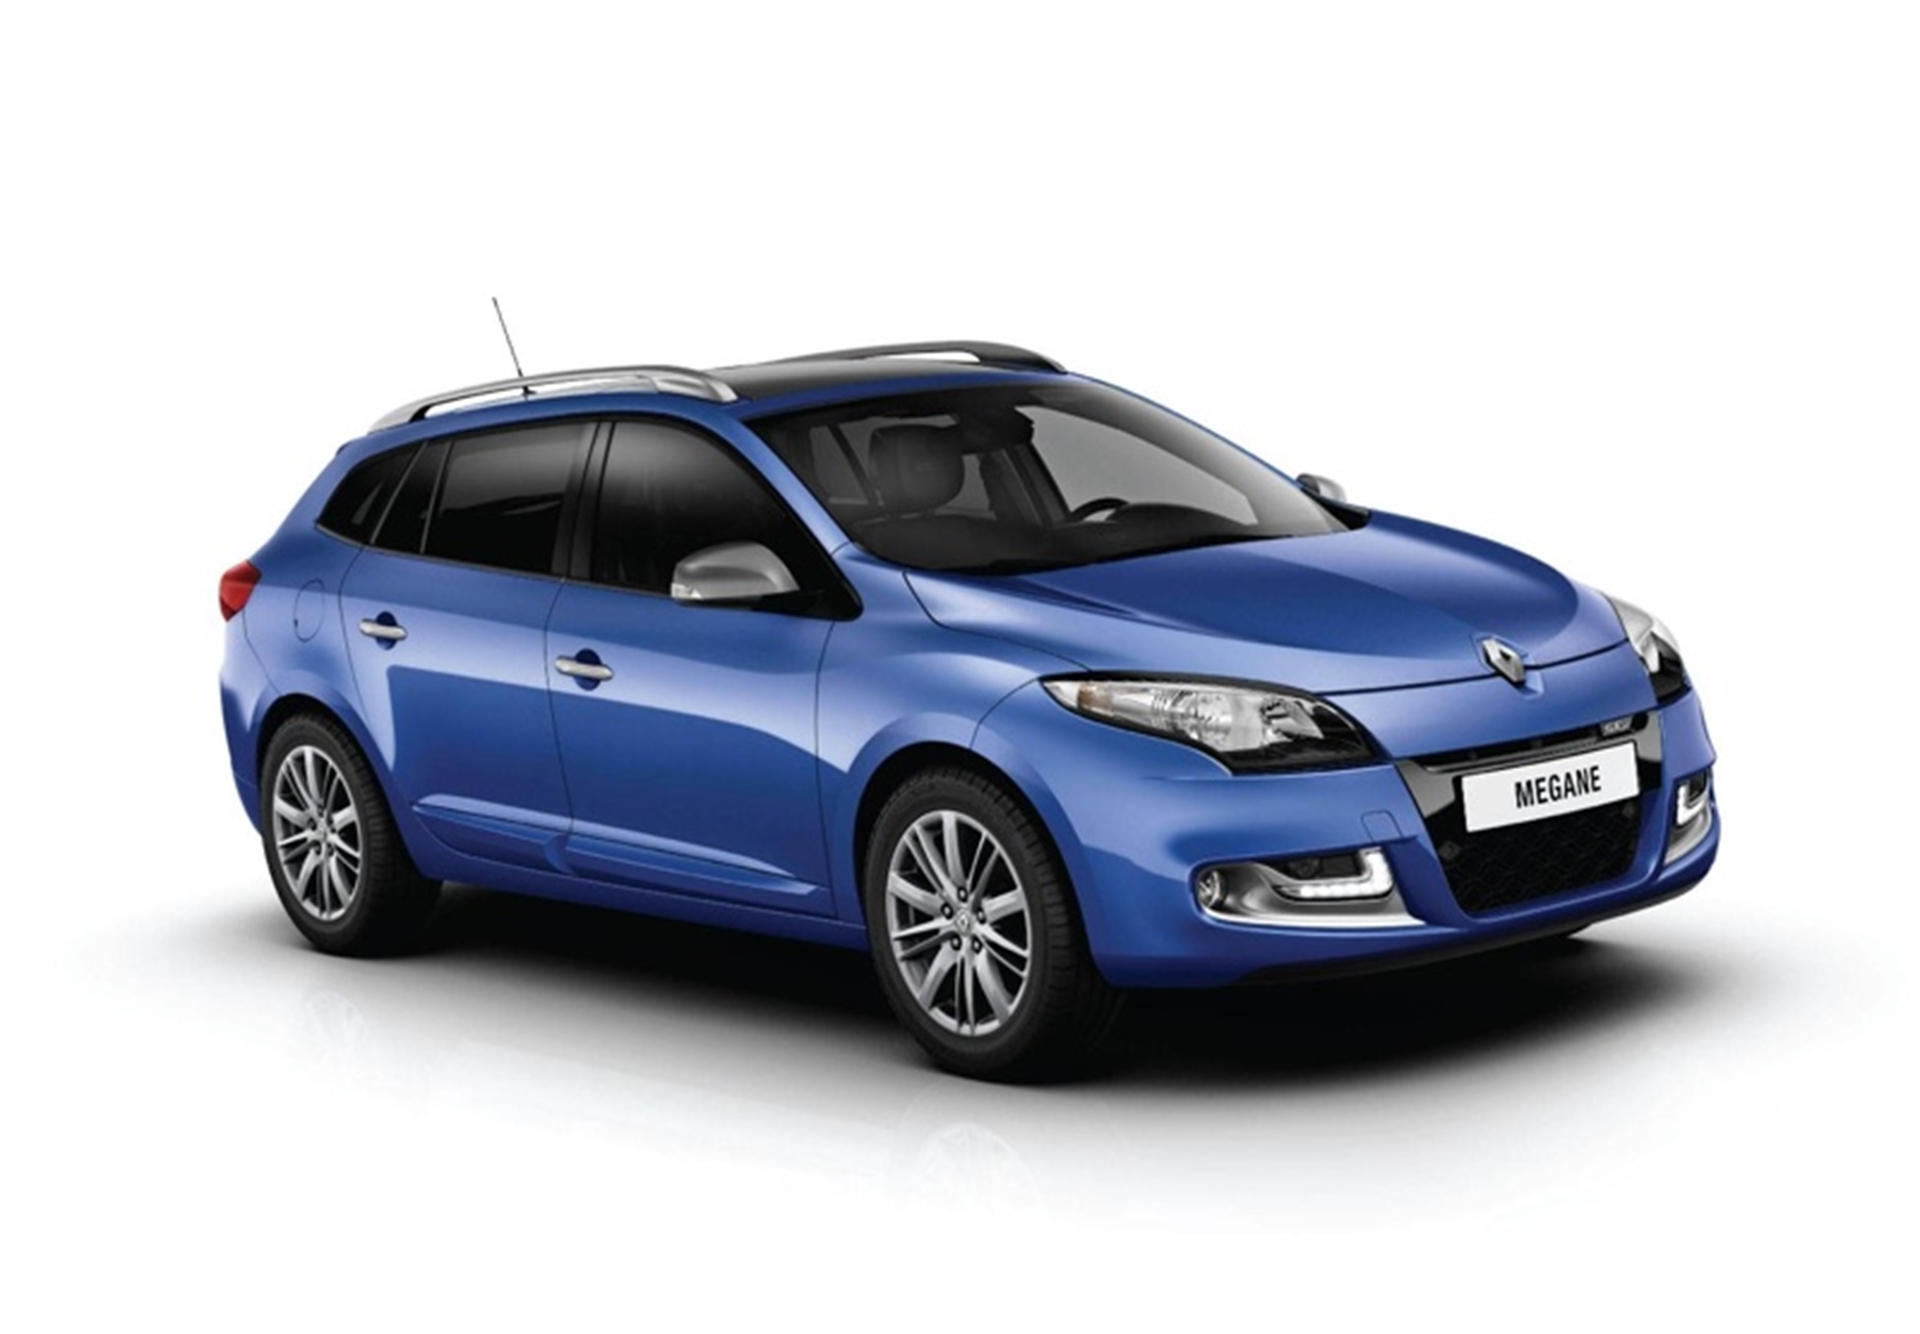 Renault Announces UK Pricing and Specification for New Megane 2012 Range